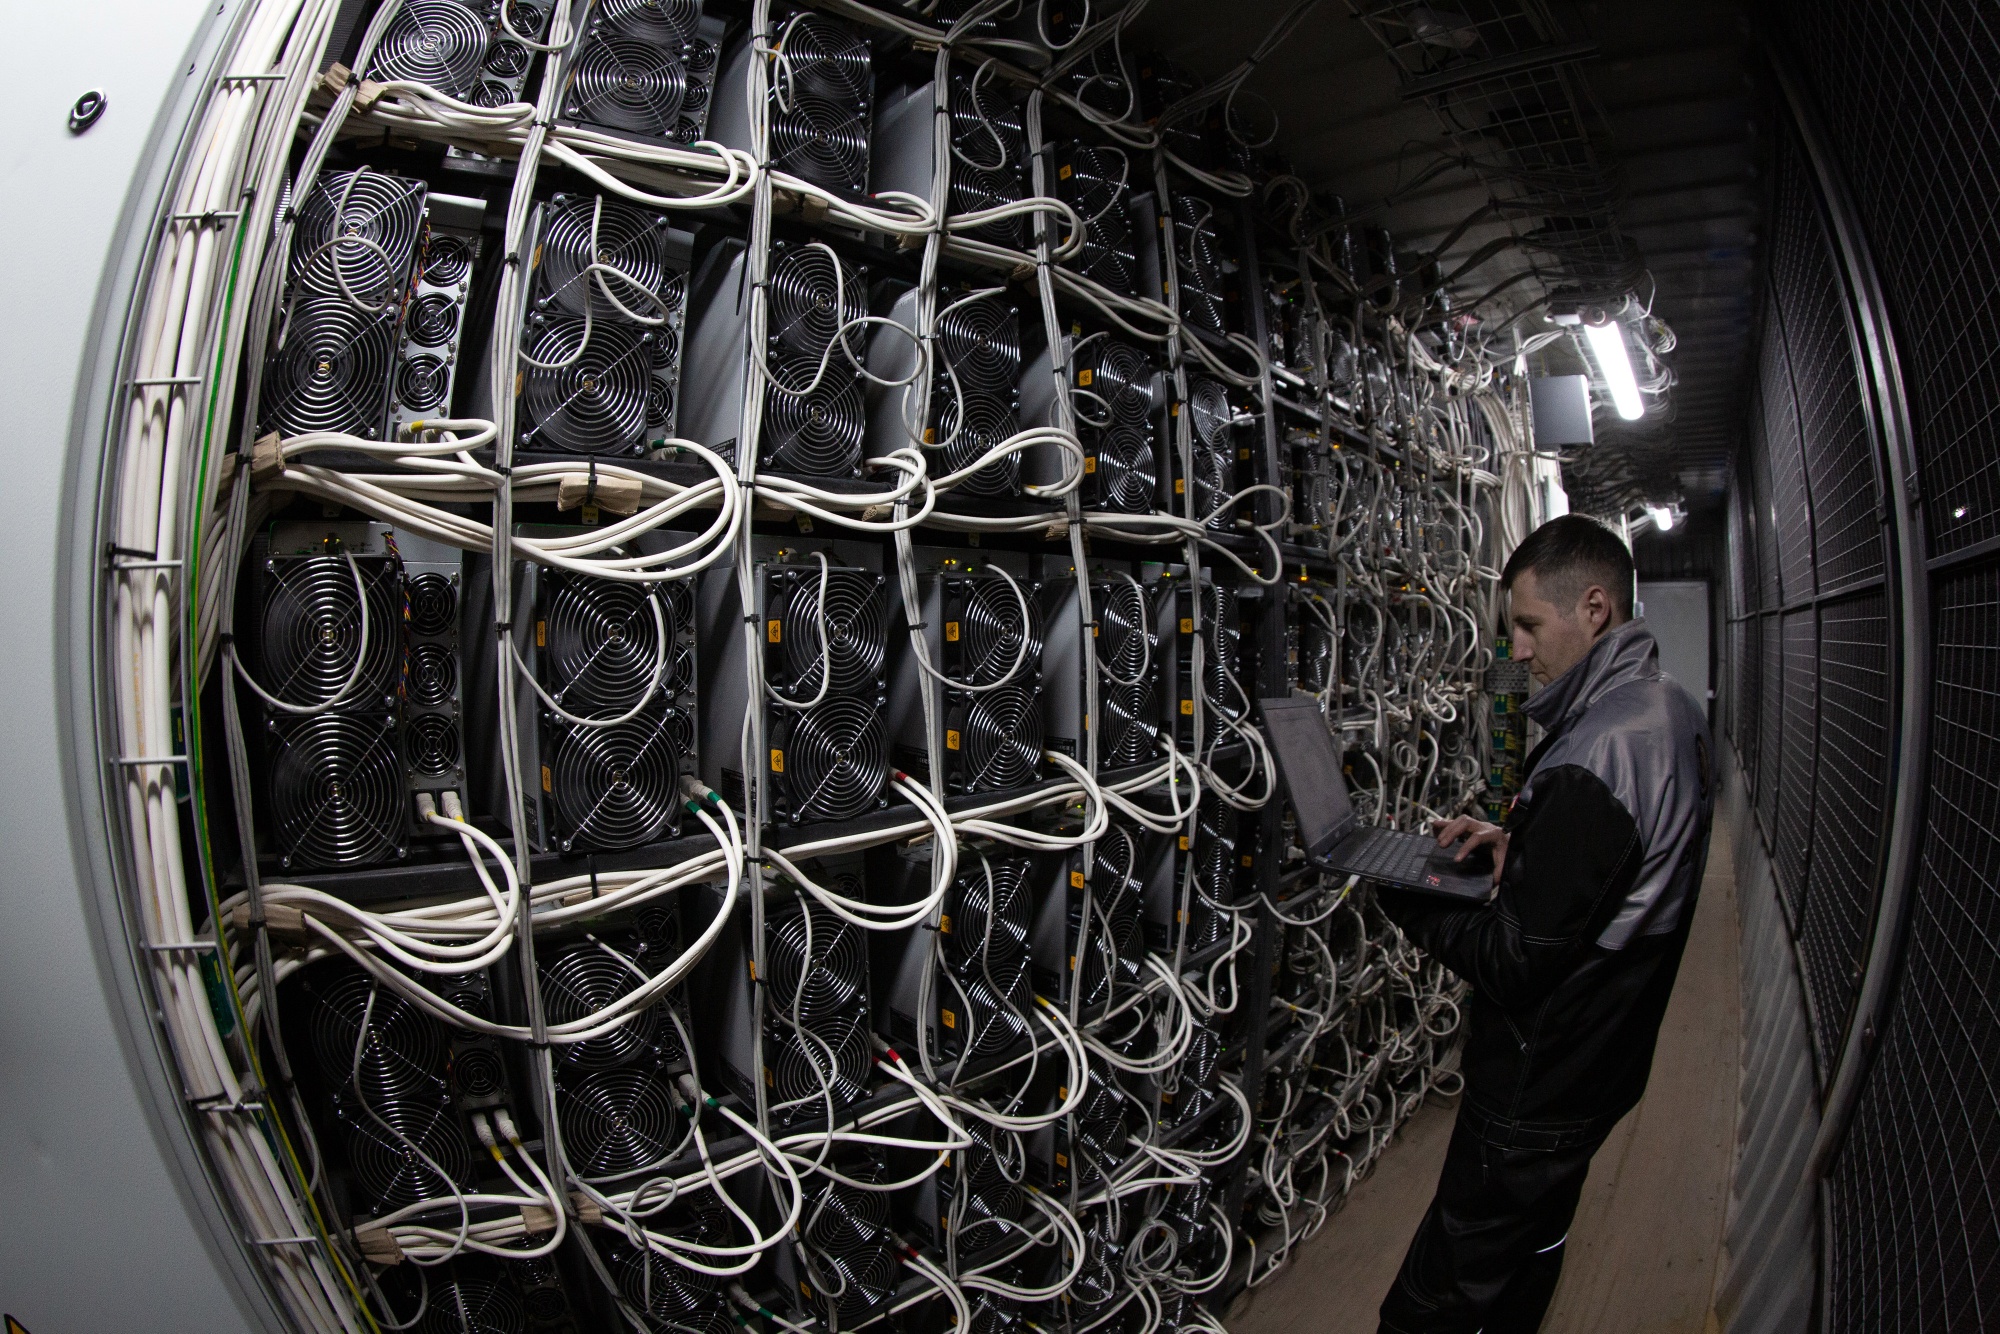 An engineer runs diagnostic tests at a cryptocurrency mining farm in Norilsk, Russia.